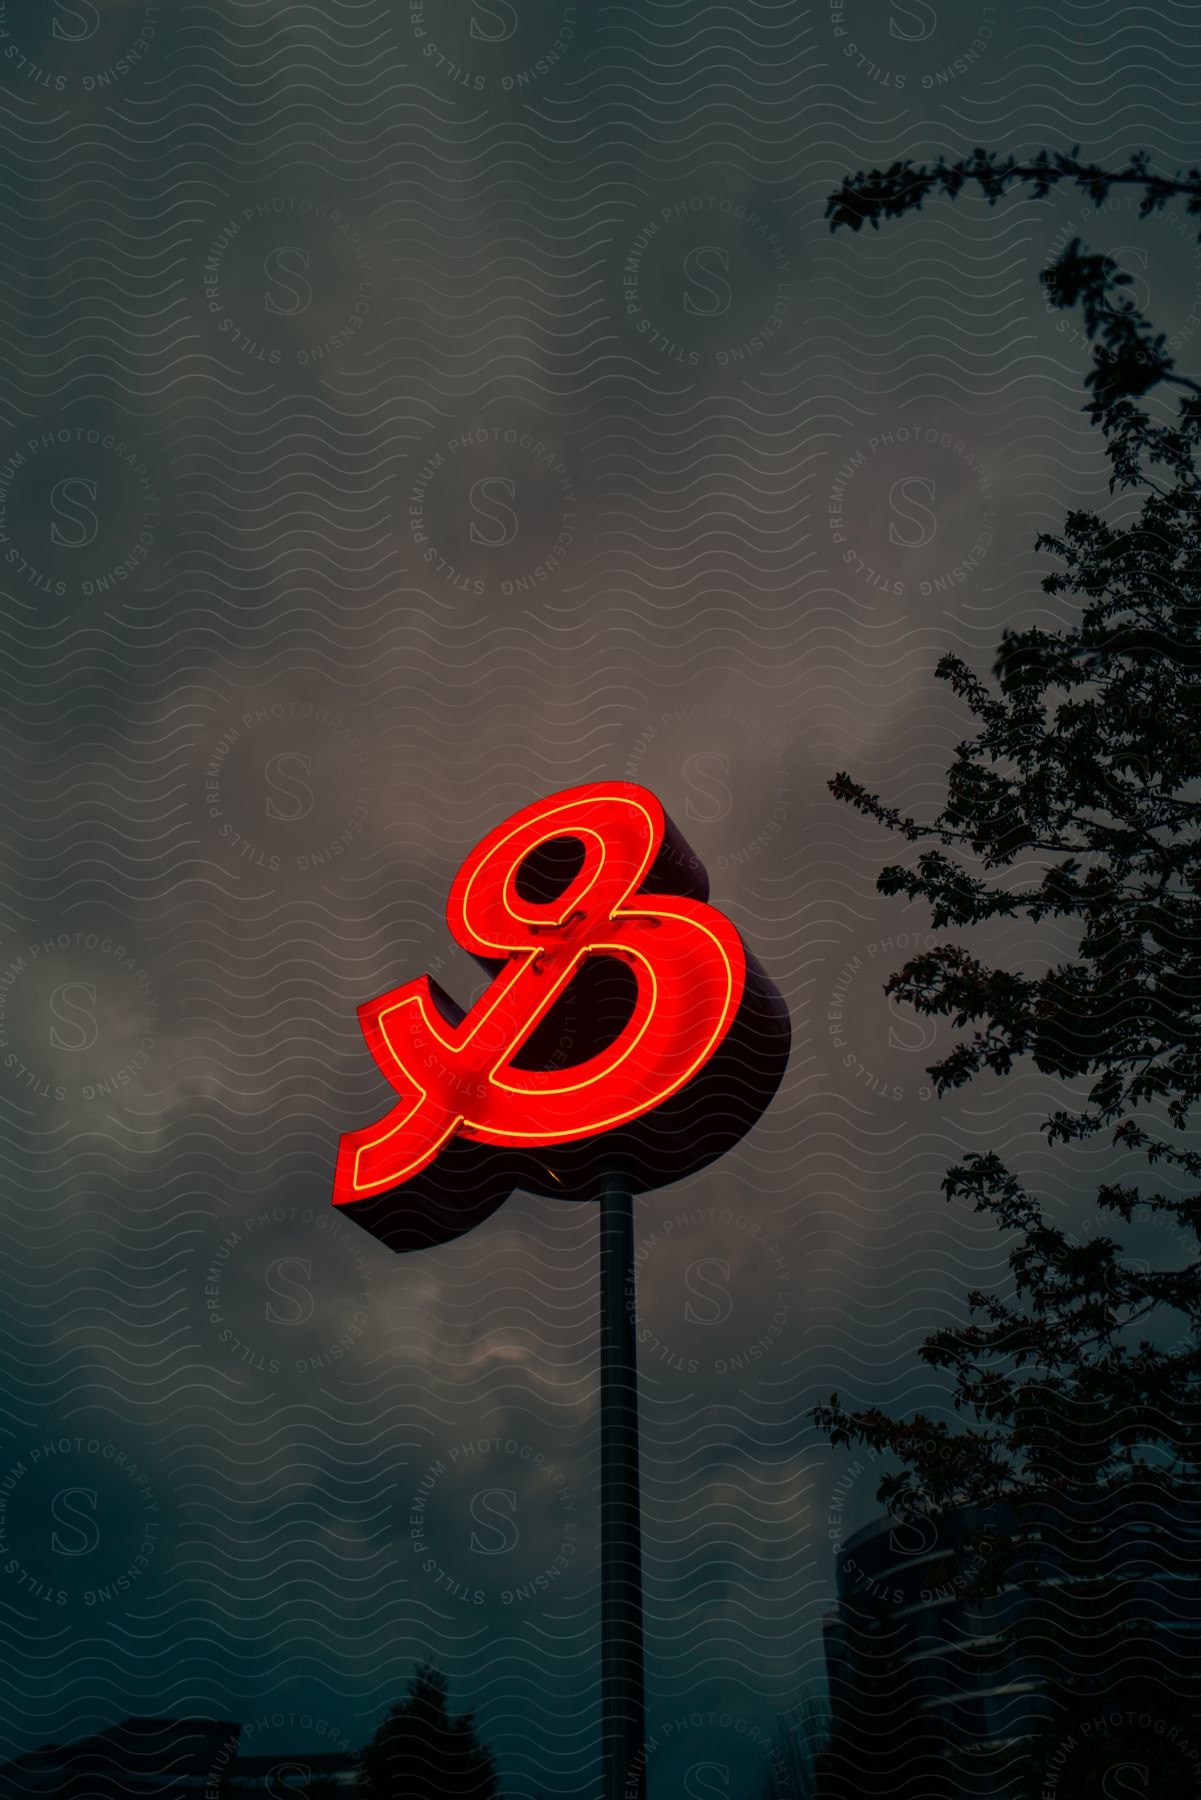 An illuminated neon sign rises high in the darkness